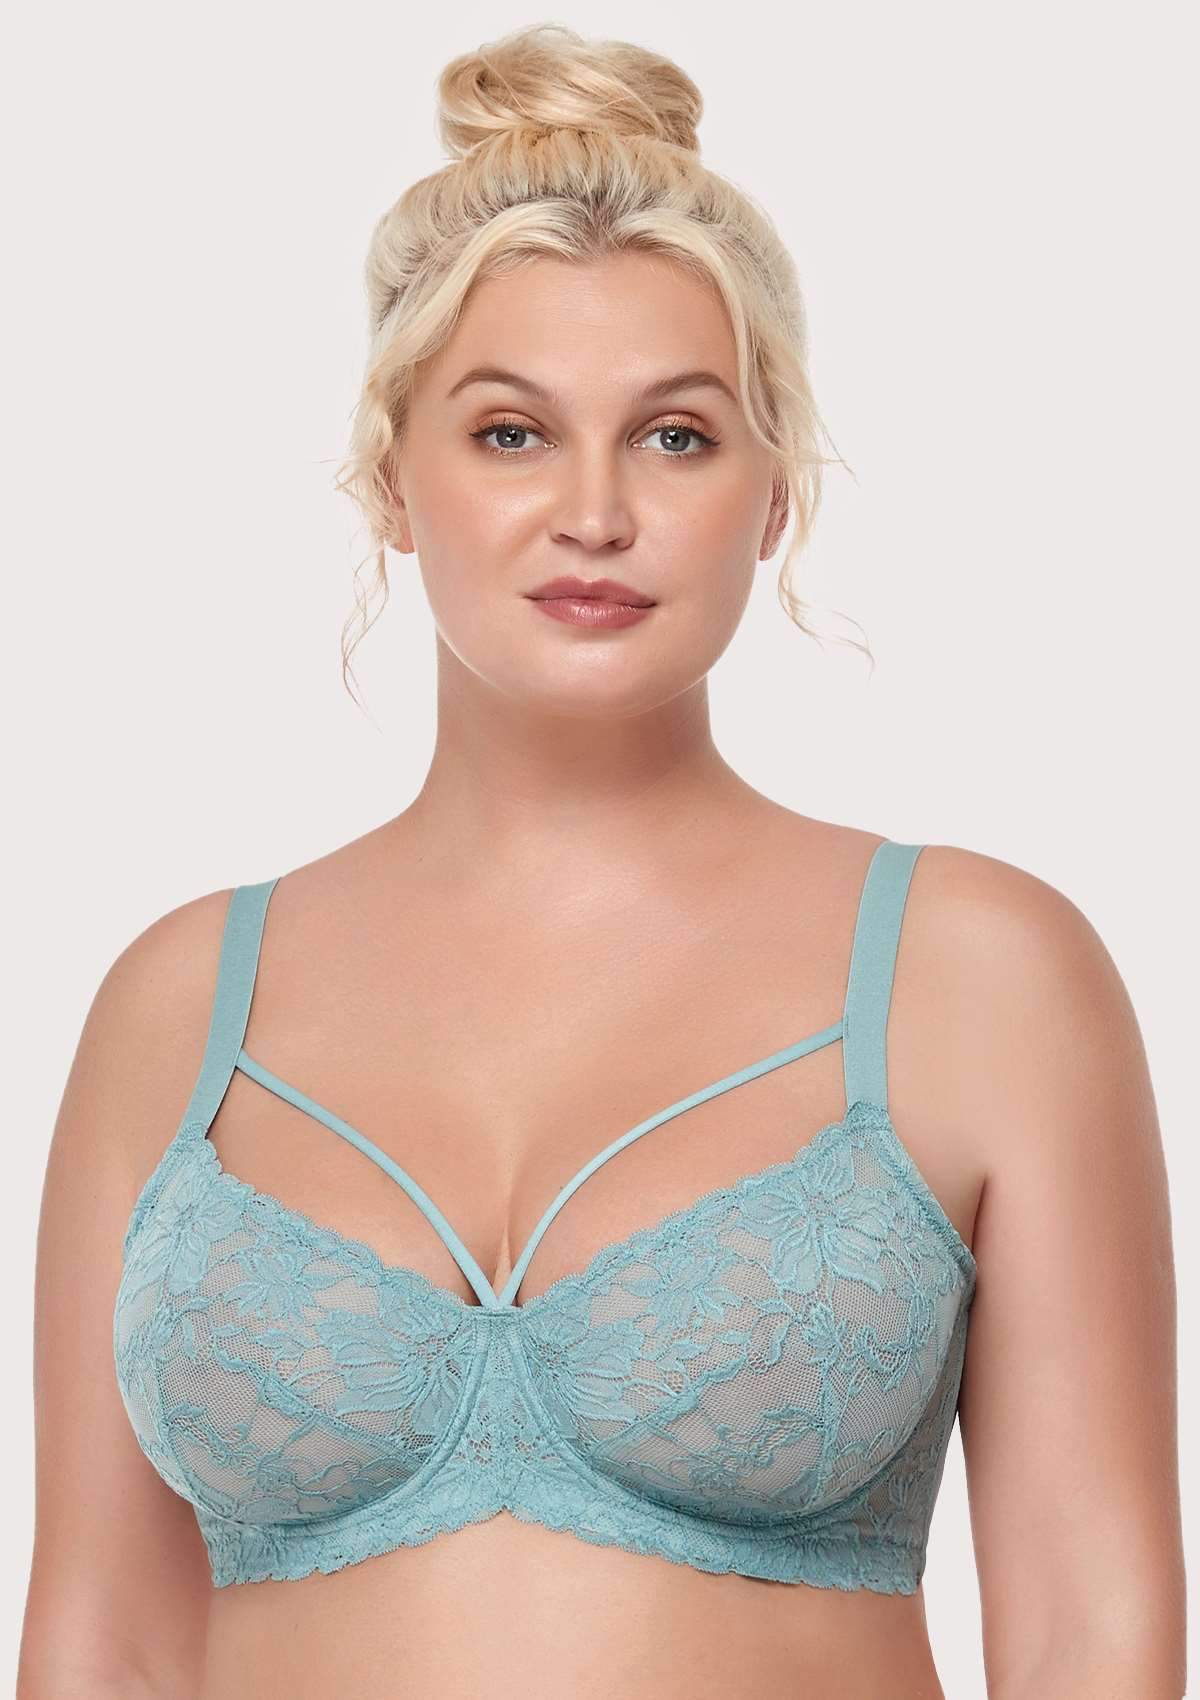 HSIA Pretty In Petals Unlined Lace Bra: Comfortable And Supportive Bra - Crystal Blue / 38 / DDD/F